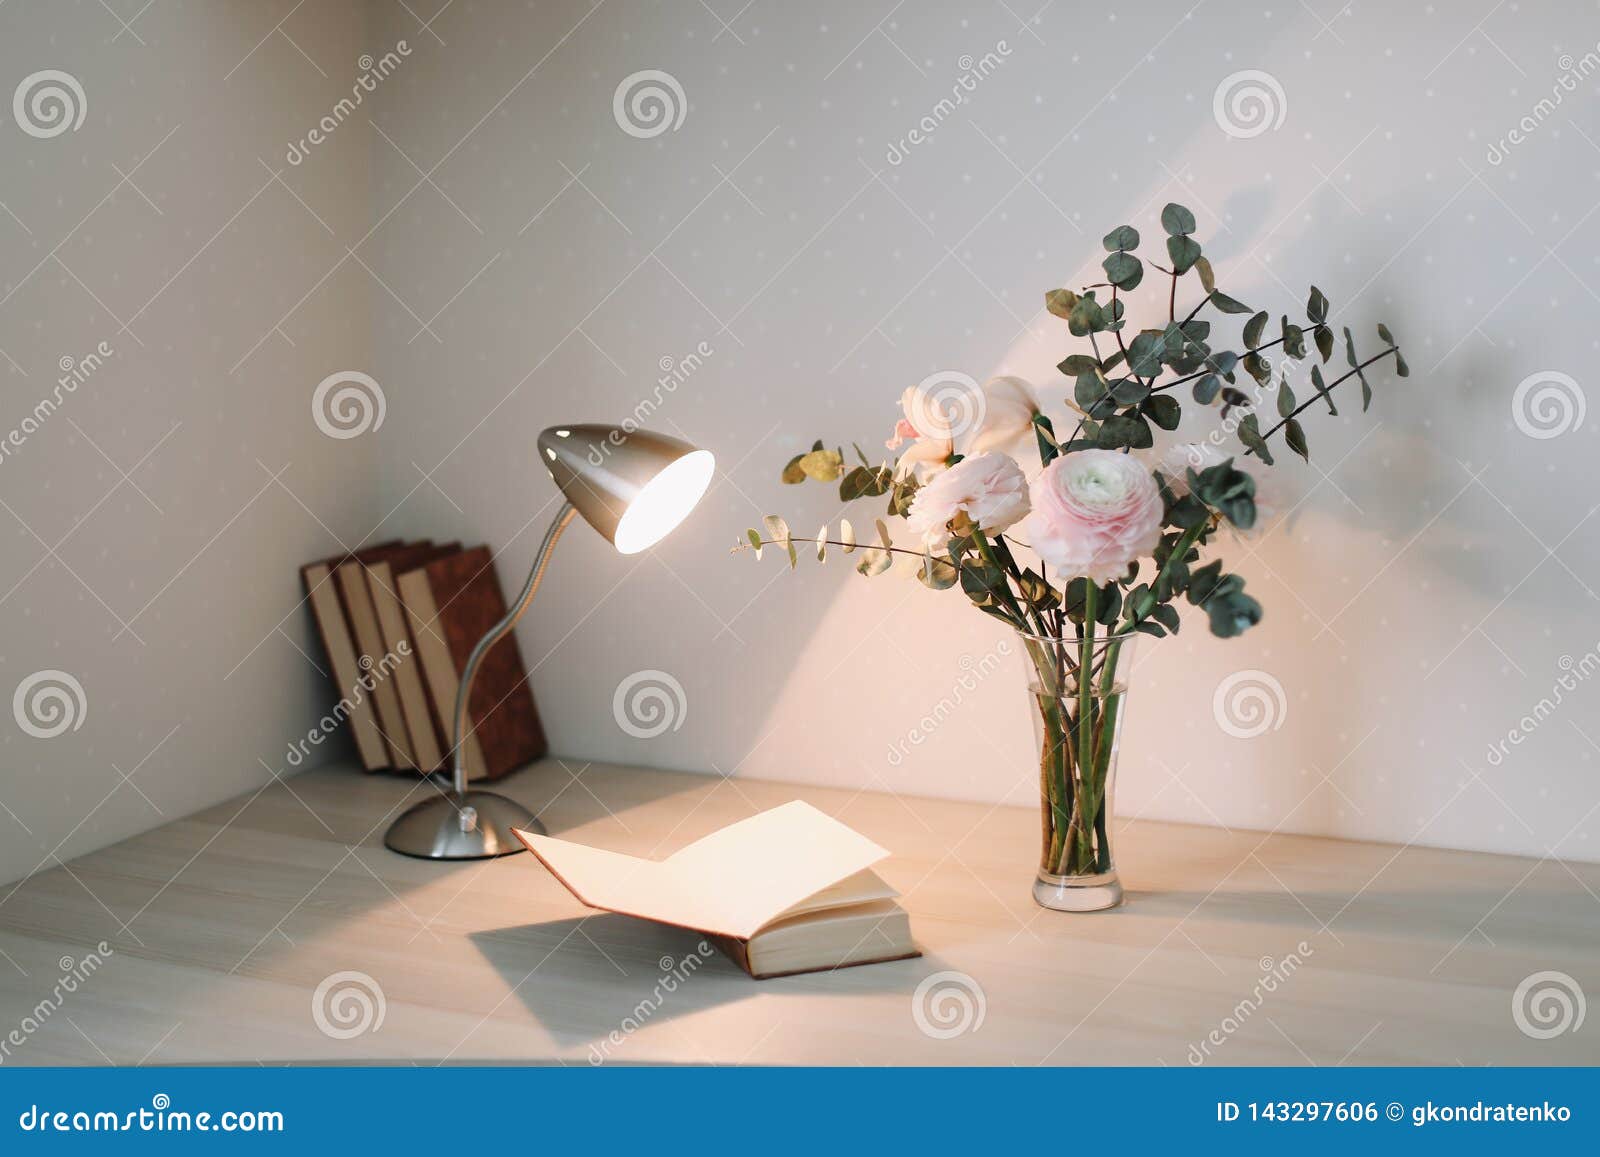 Wooden Desk with Books and Flowers. Bouquet and Books on White ...